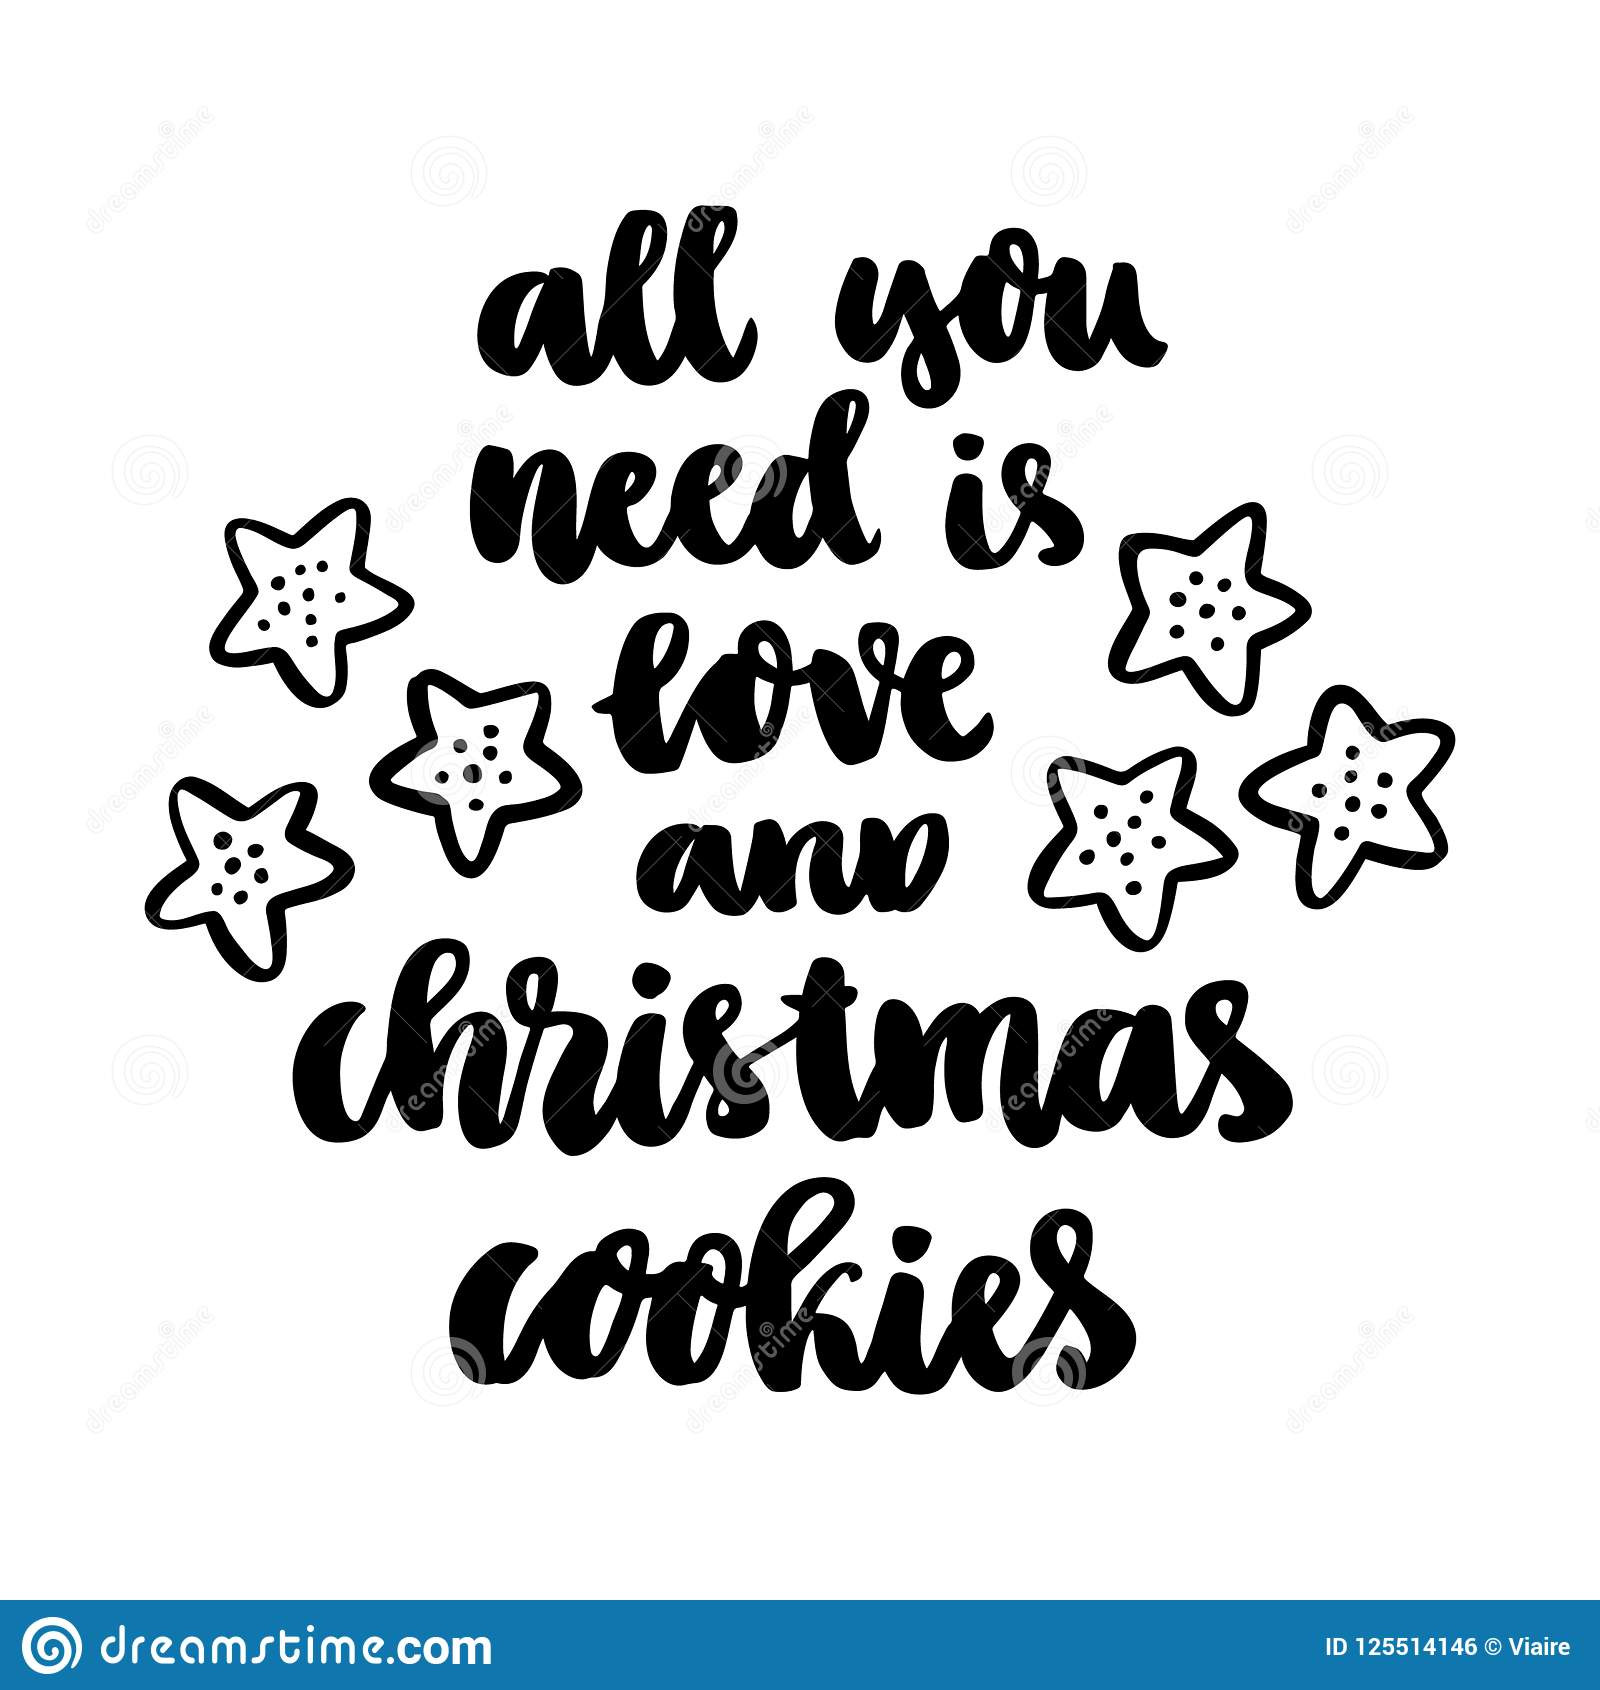 Christmas Cookie Quote
 The Hand drawing Quote All You Need Is Love And Christmas